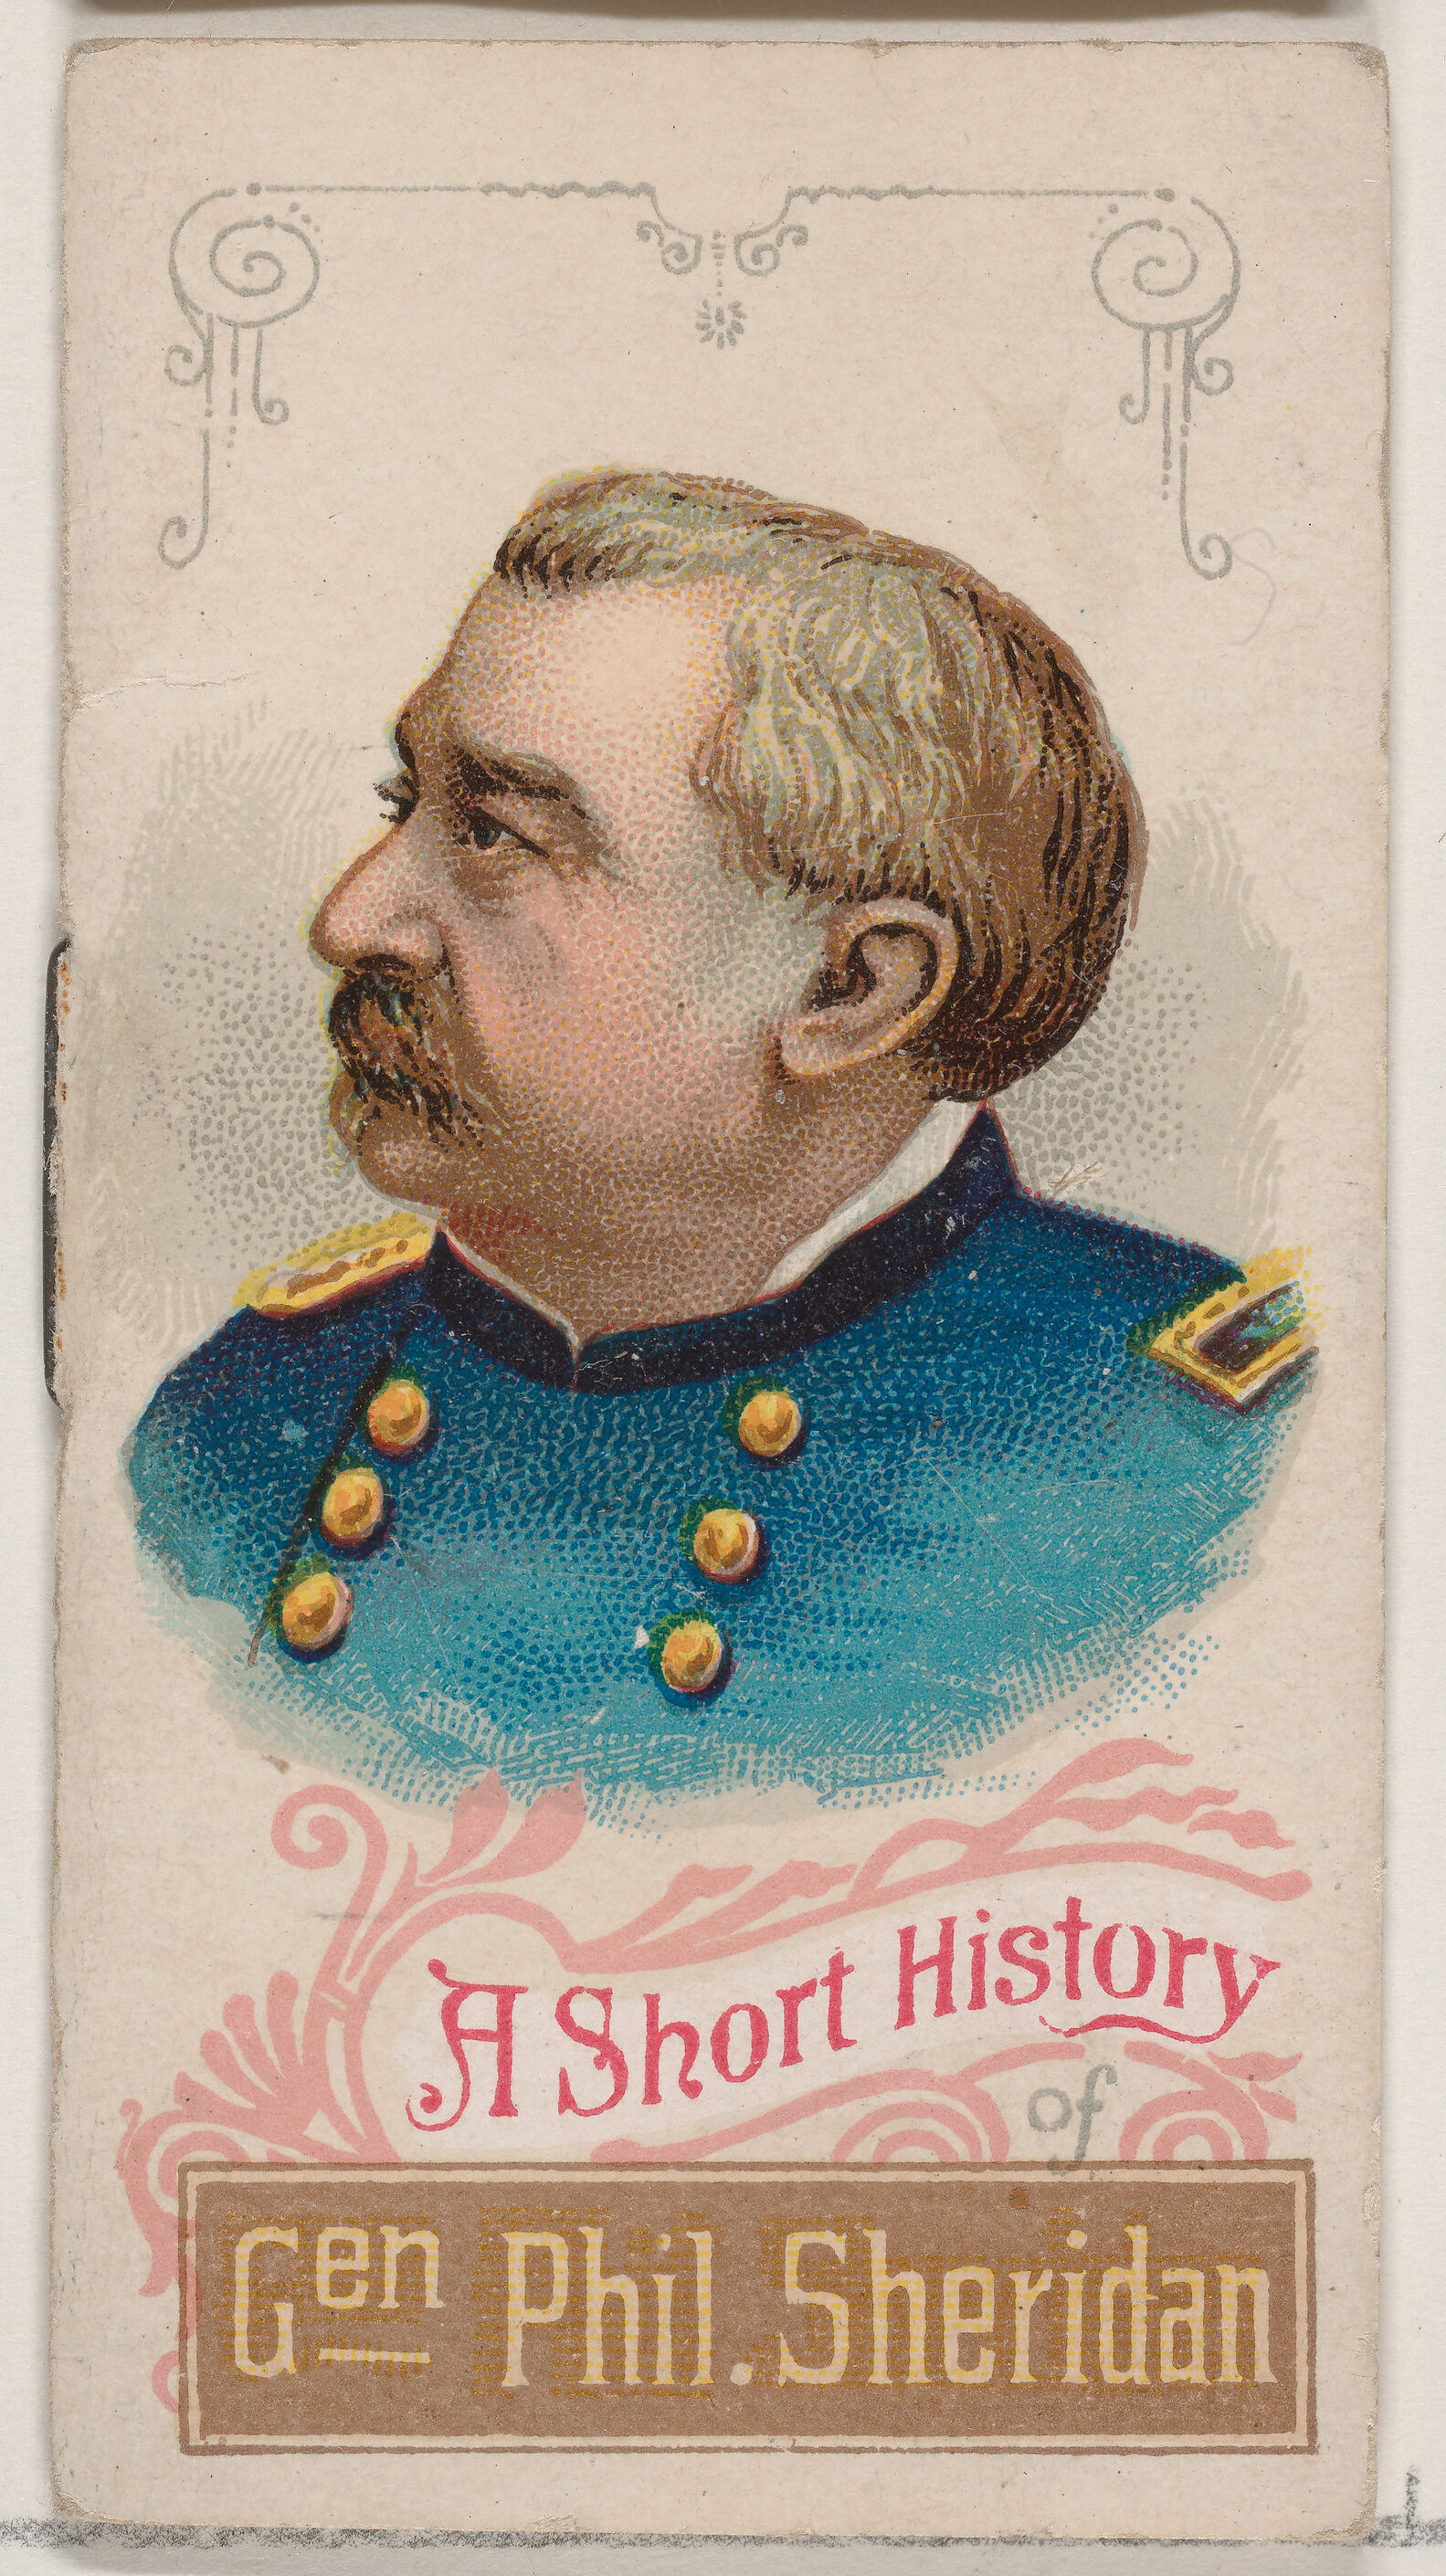 A Short History of General Philip Henry Sheridan, from the Histories of Generals series of booklets (N78) for Duke brand cigarettes, Issued by W. Duke, Sons &amp; Co. (New York and Durham, N.C.), Commercial color lithograph 